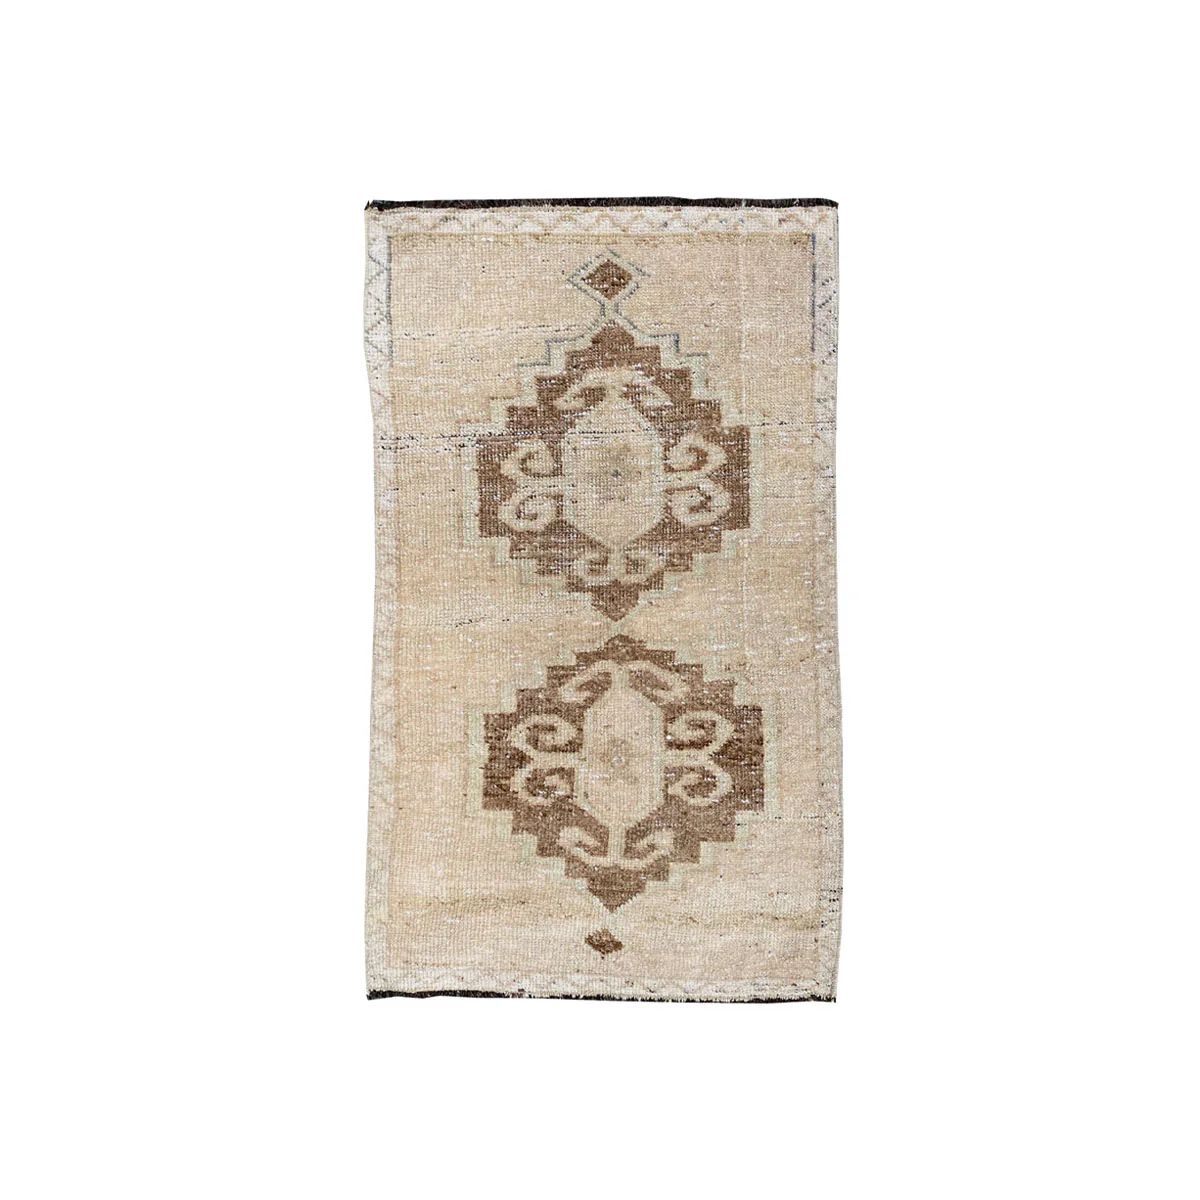 'Darby' Vintage Rug (2 x 3) | Tuesday Made